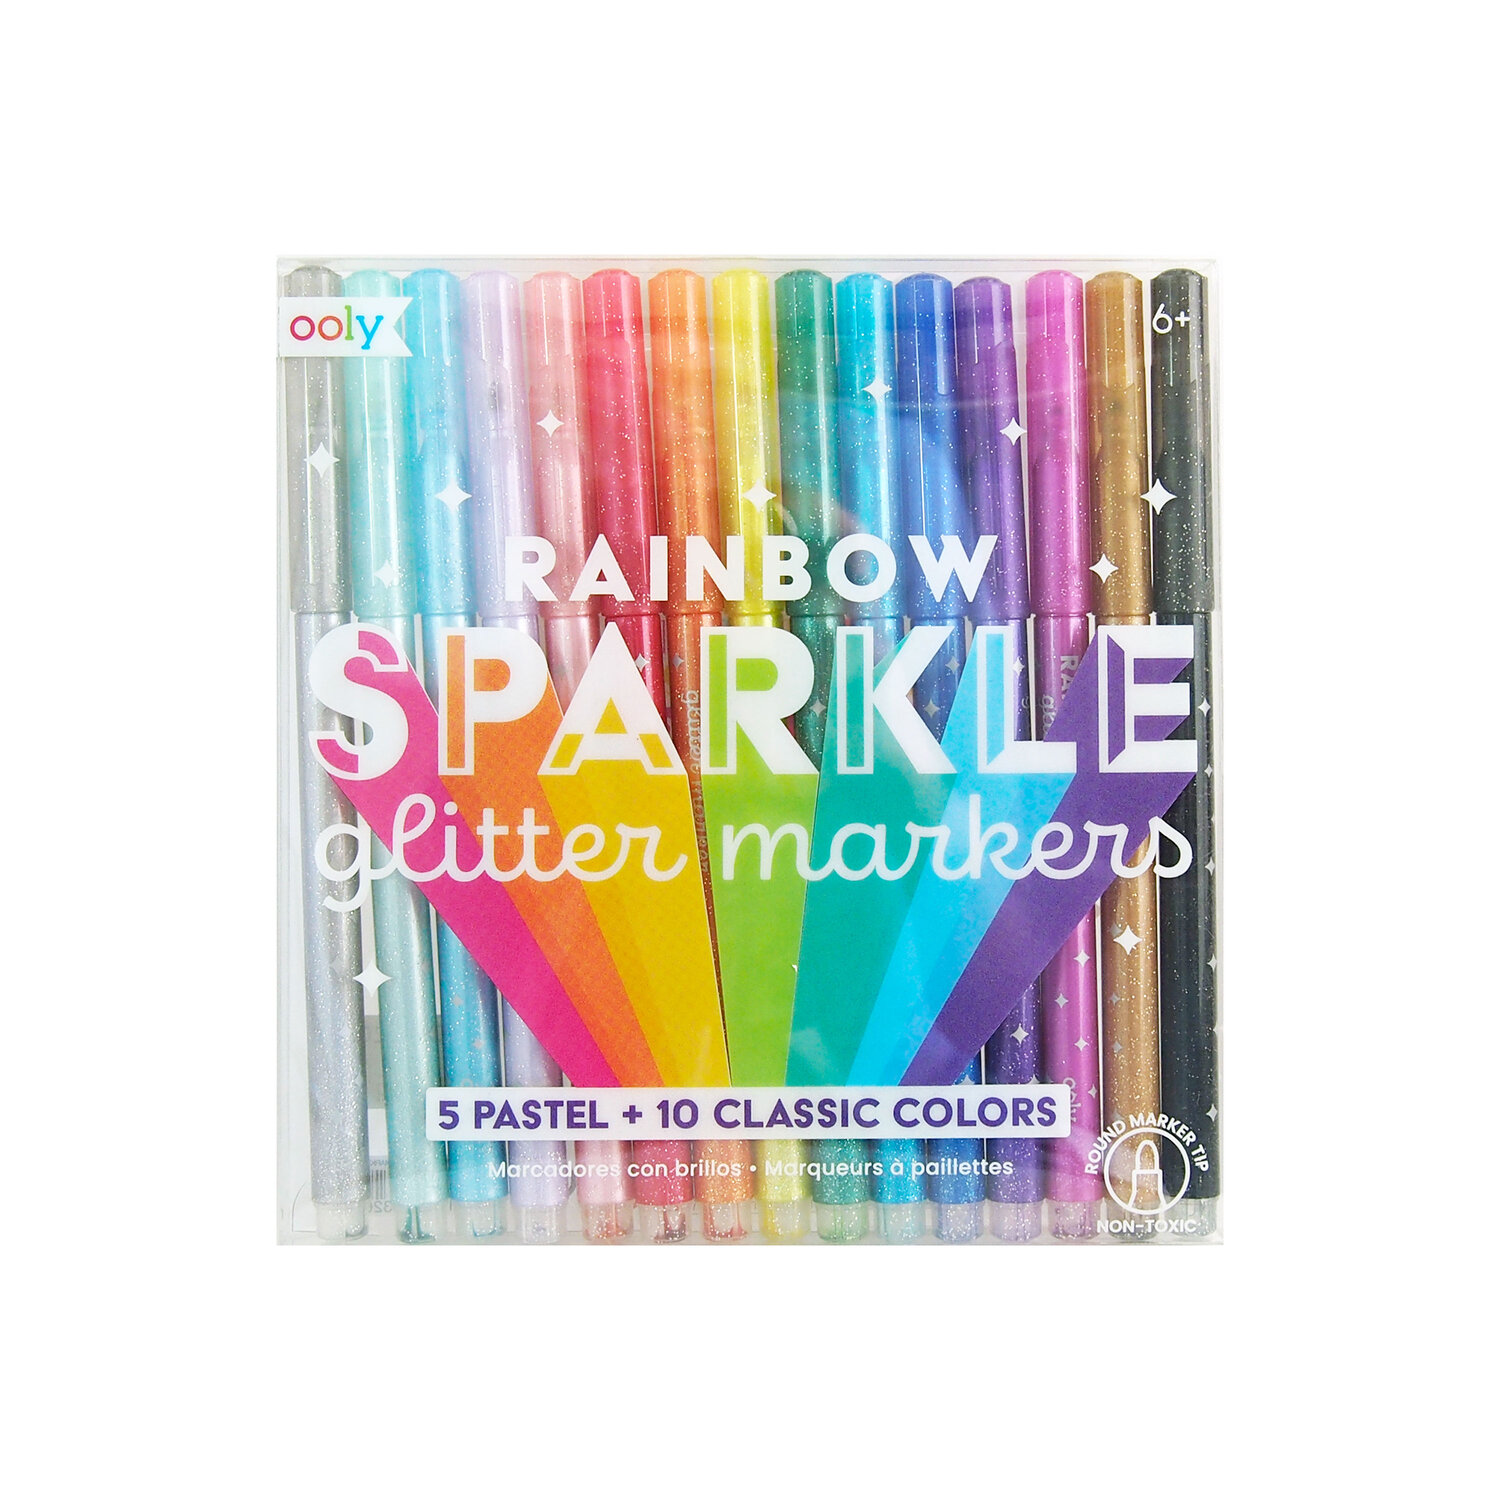 Rainbow Sparkle Metallic Watercolor Gel Crayons - Set of 12 a book by Ooly